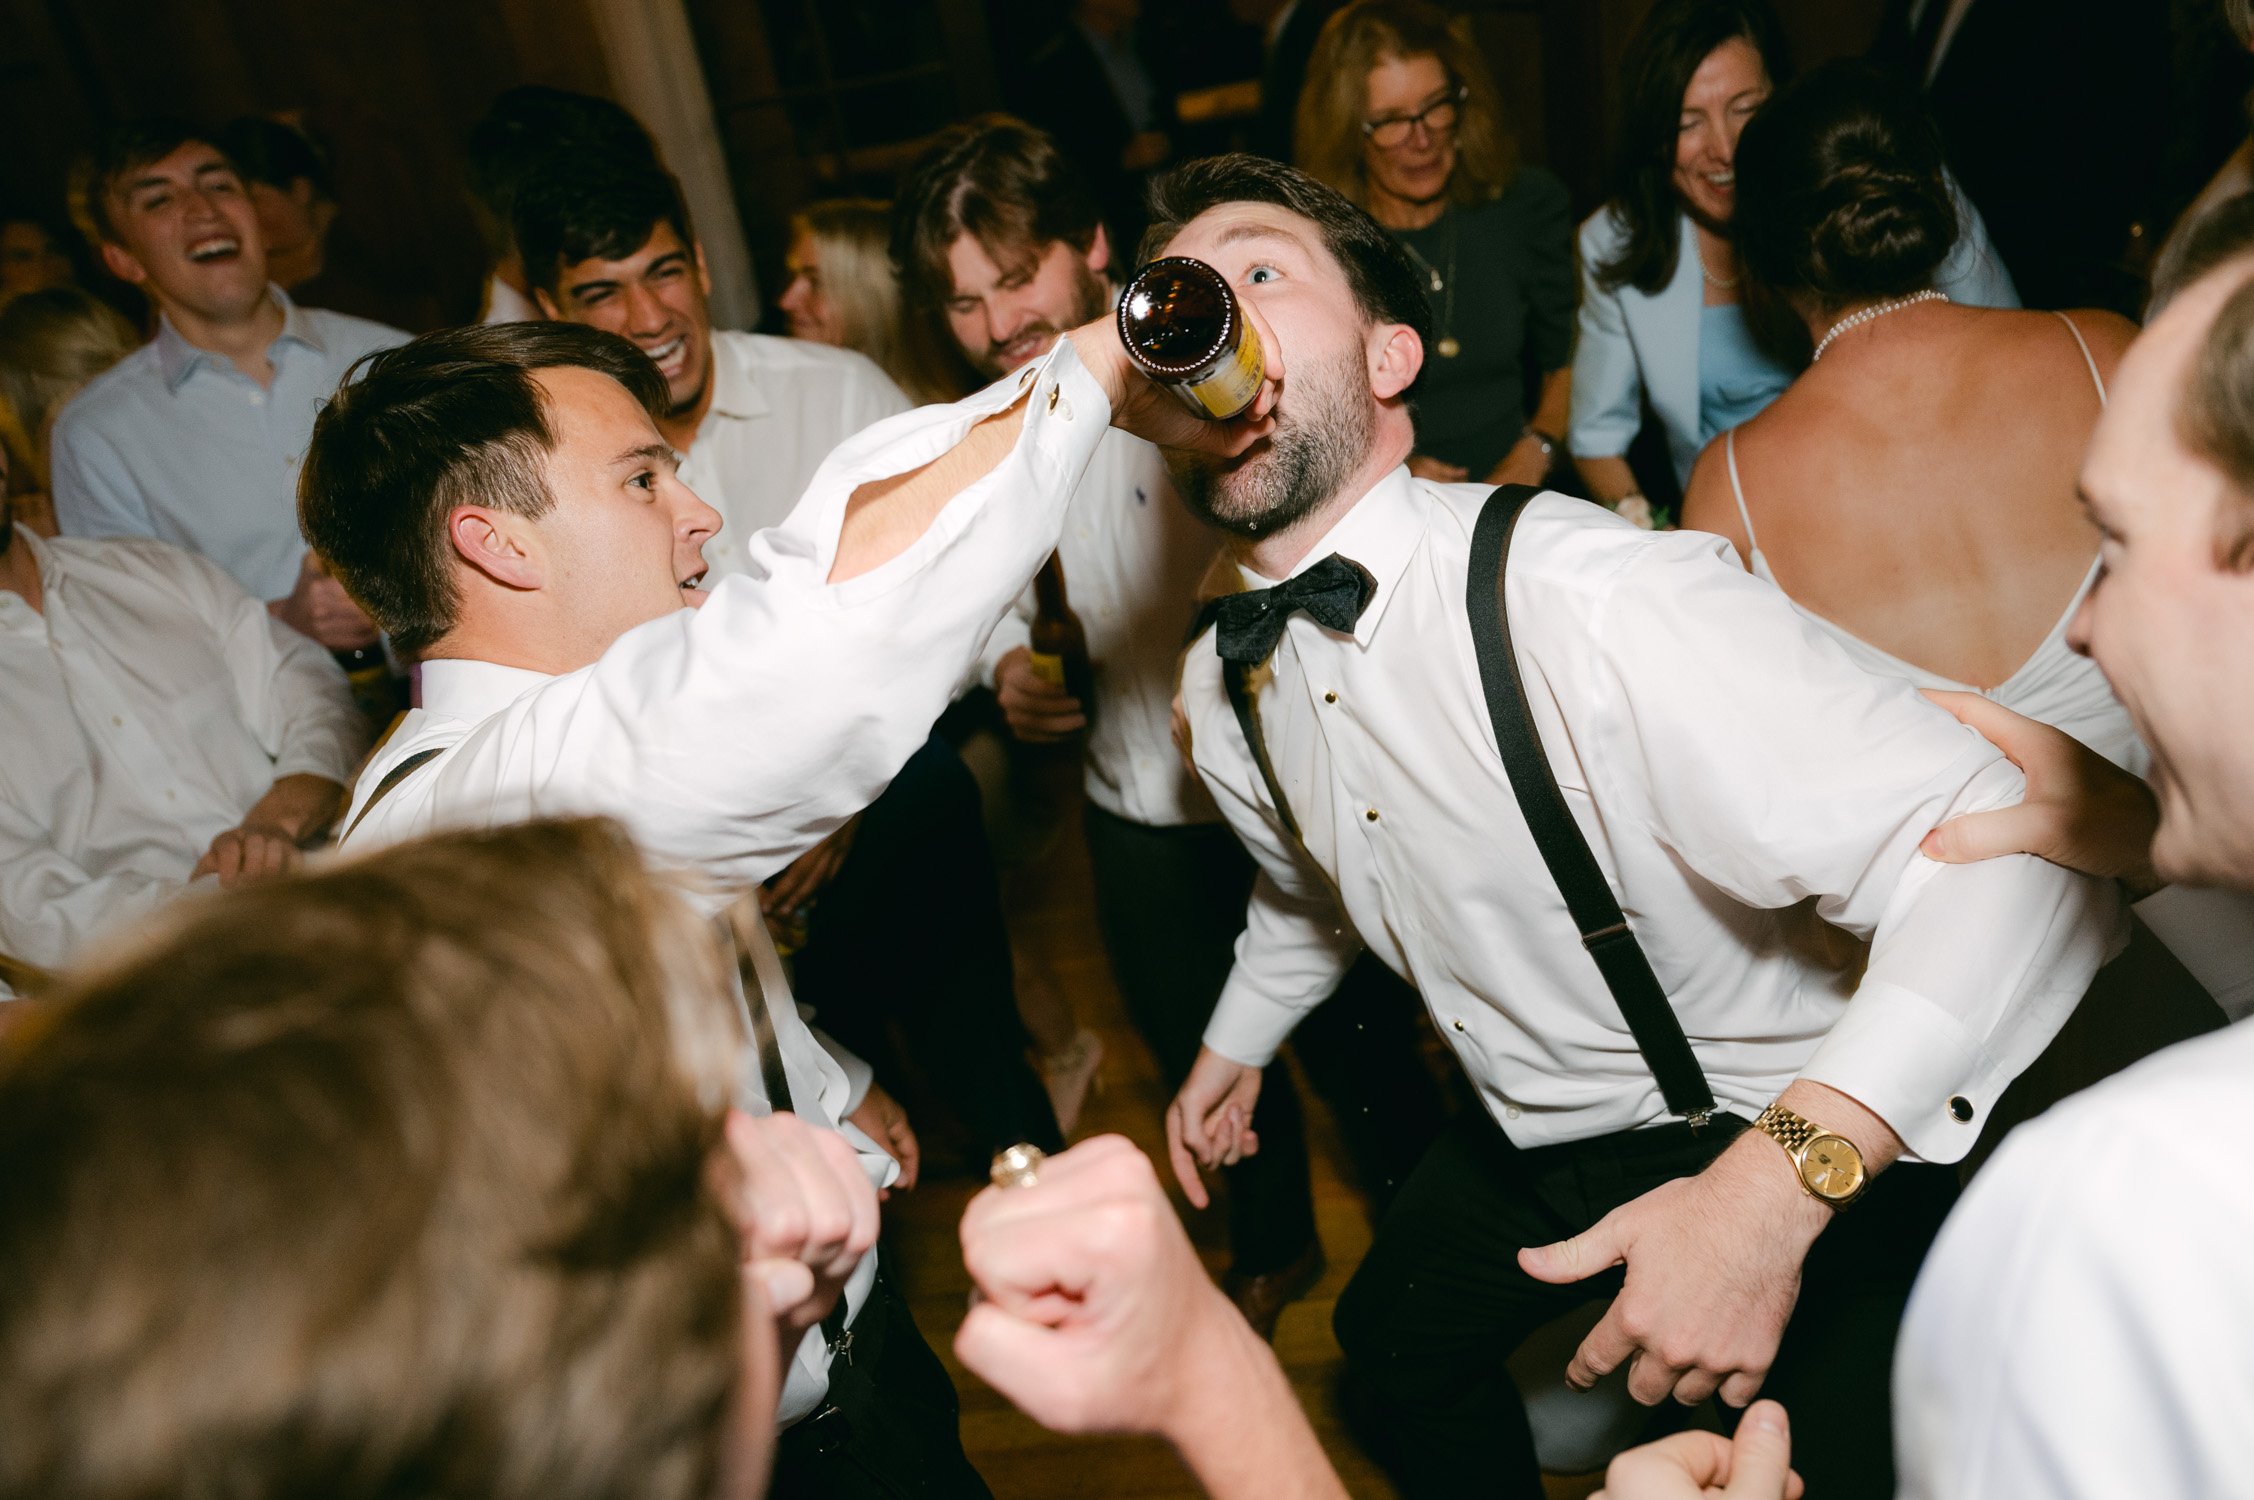 Valhalla Lake Tahoe wedding, photo of the guests drinking beer while dancing